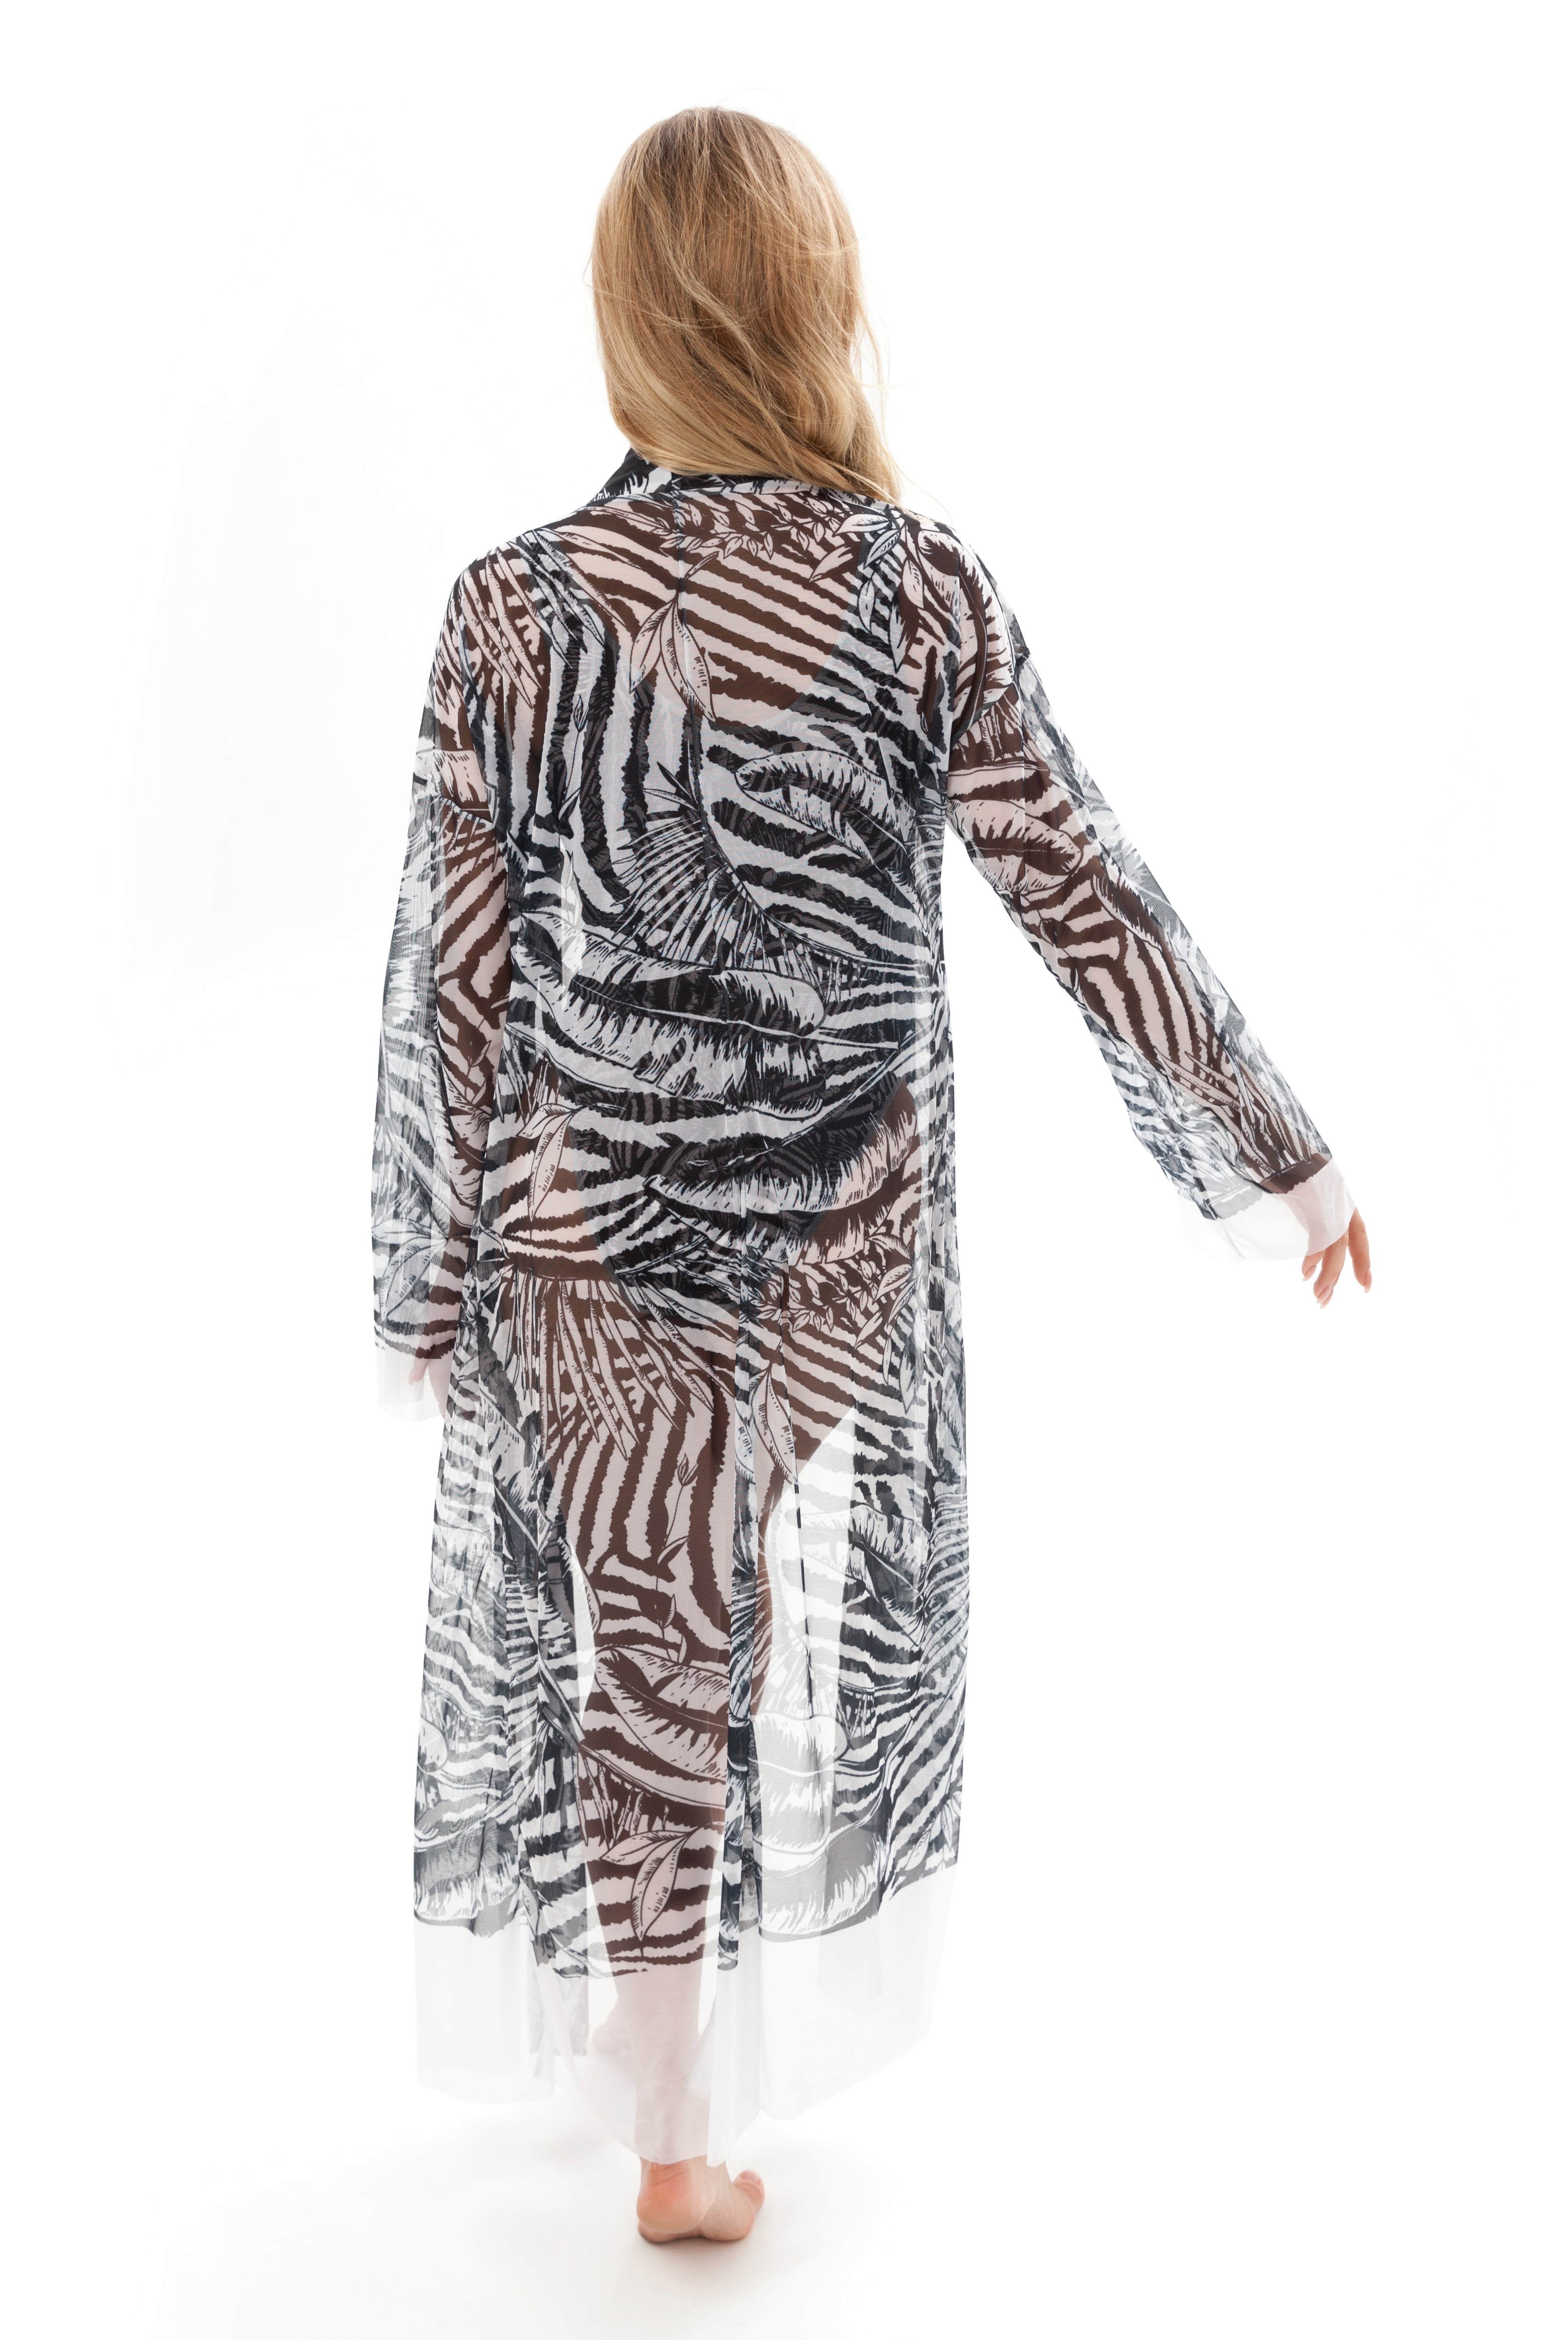 This file showcases sustainable tan-through smart swimsuits featuring a trendy Fake Zebra print. It includes a Beach Robe offering SPF35 protection, embodying a new classic beachwear style